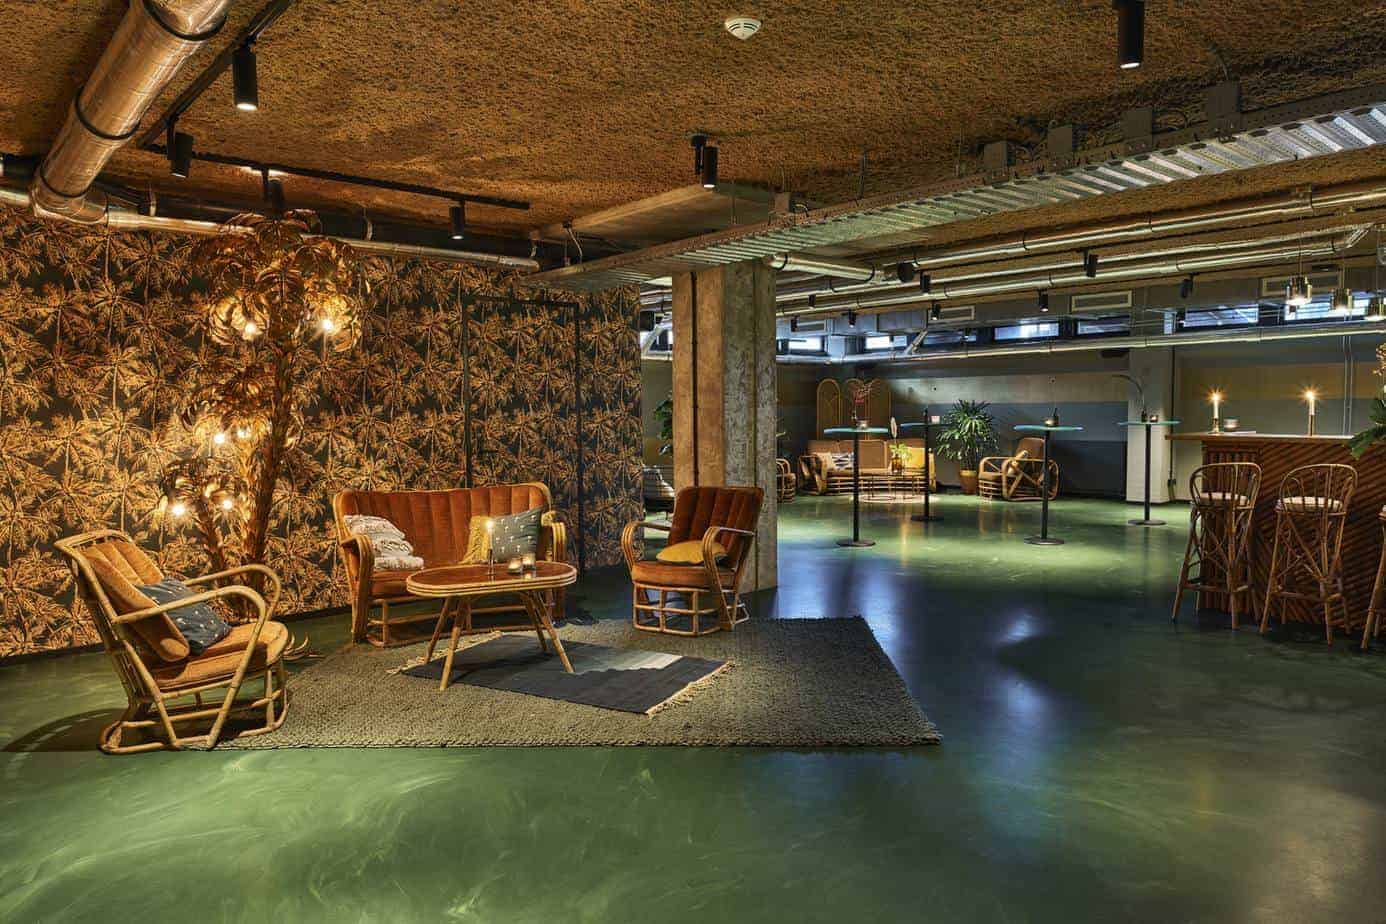 Inspiring underground location with a quirky design